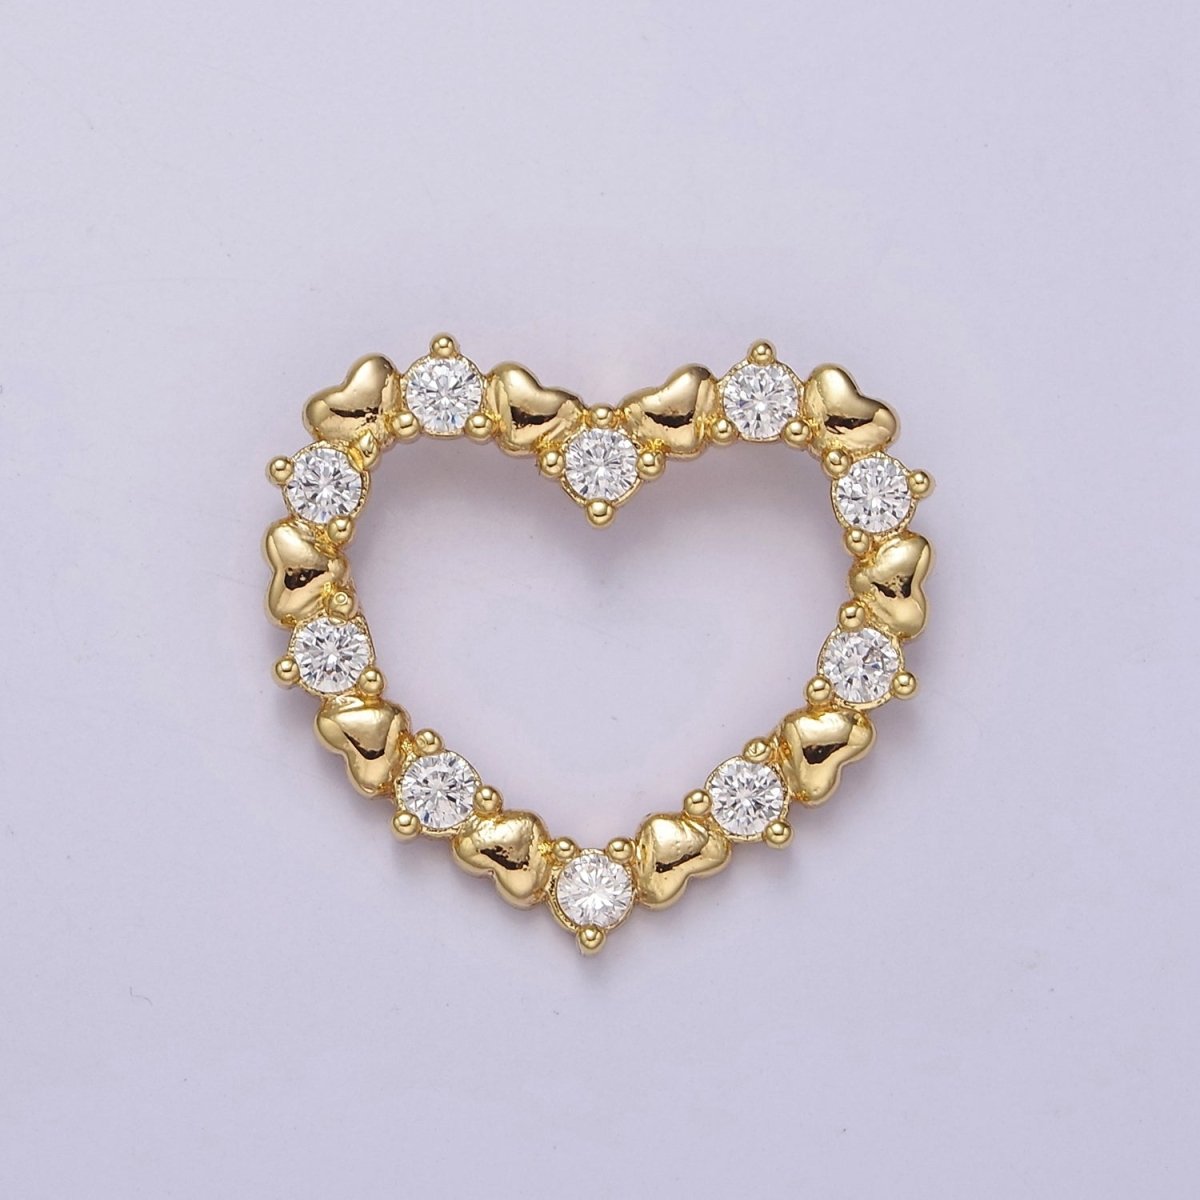 Gold Filled Open Heart Charm Gold Heart Pendant with CZ for Mother Day Gift Idea J-391 - DLUXCA